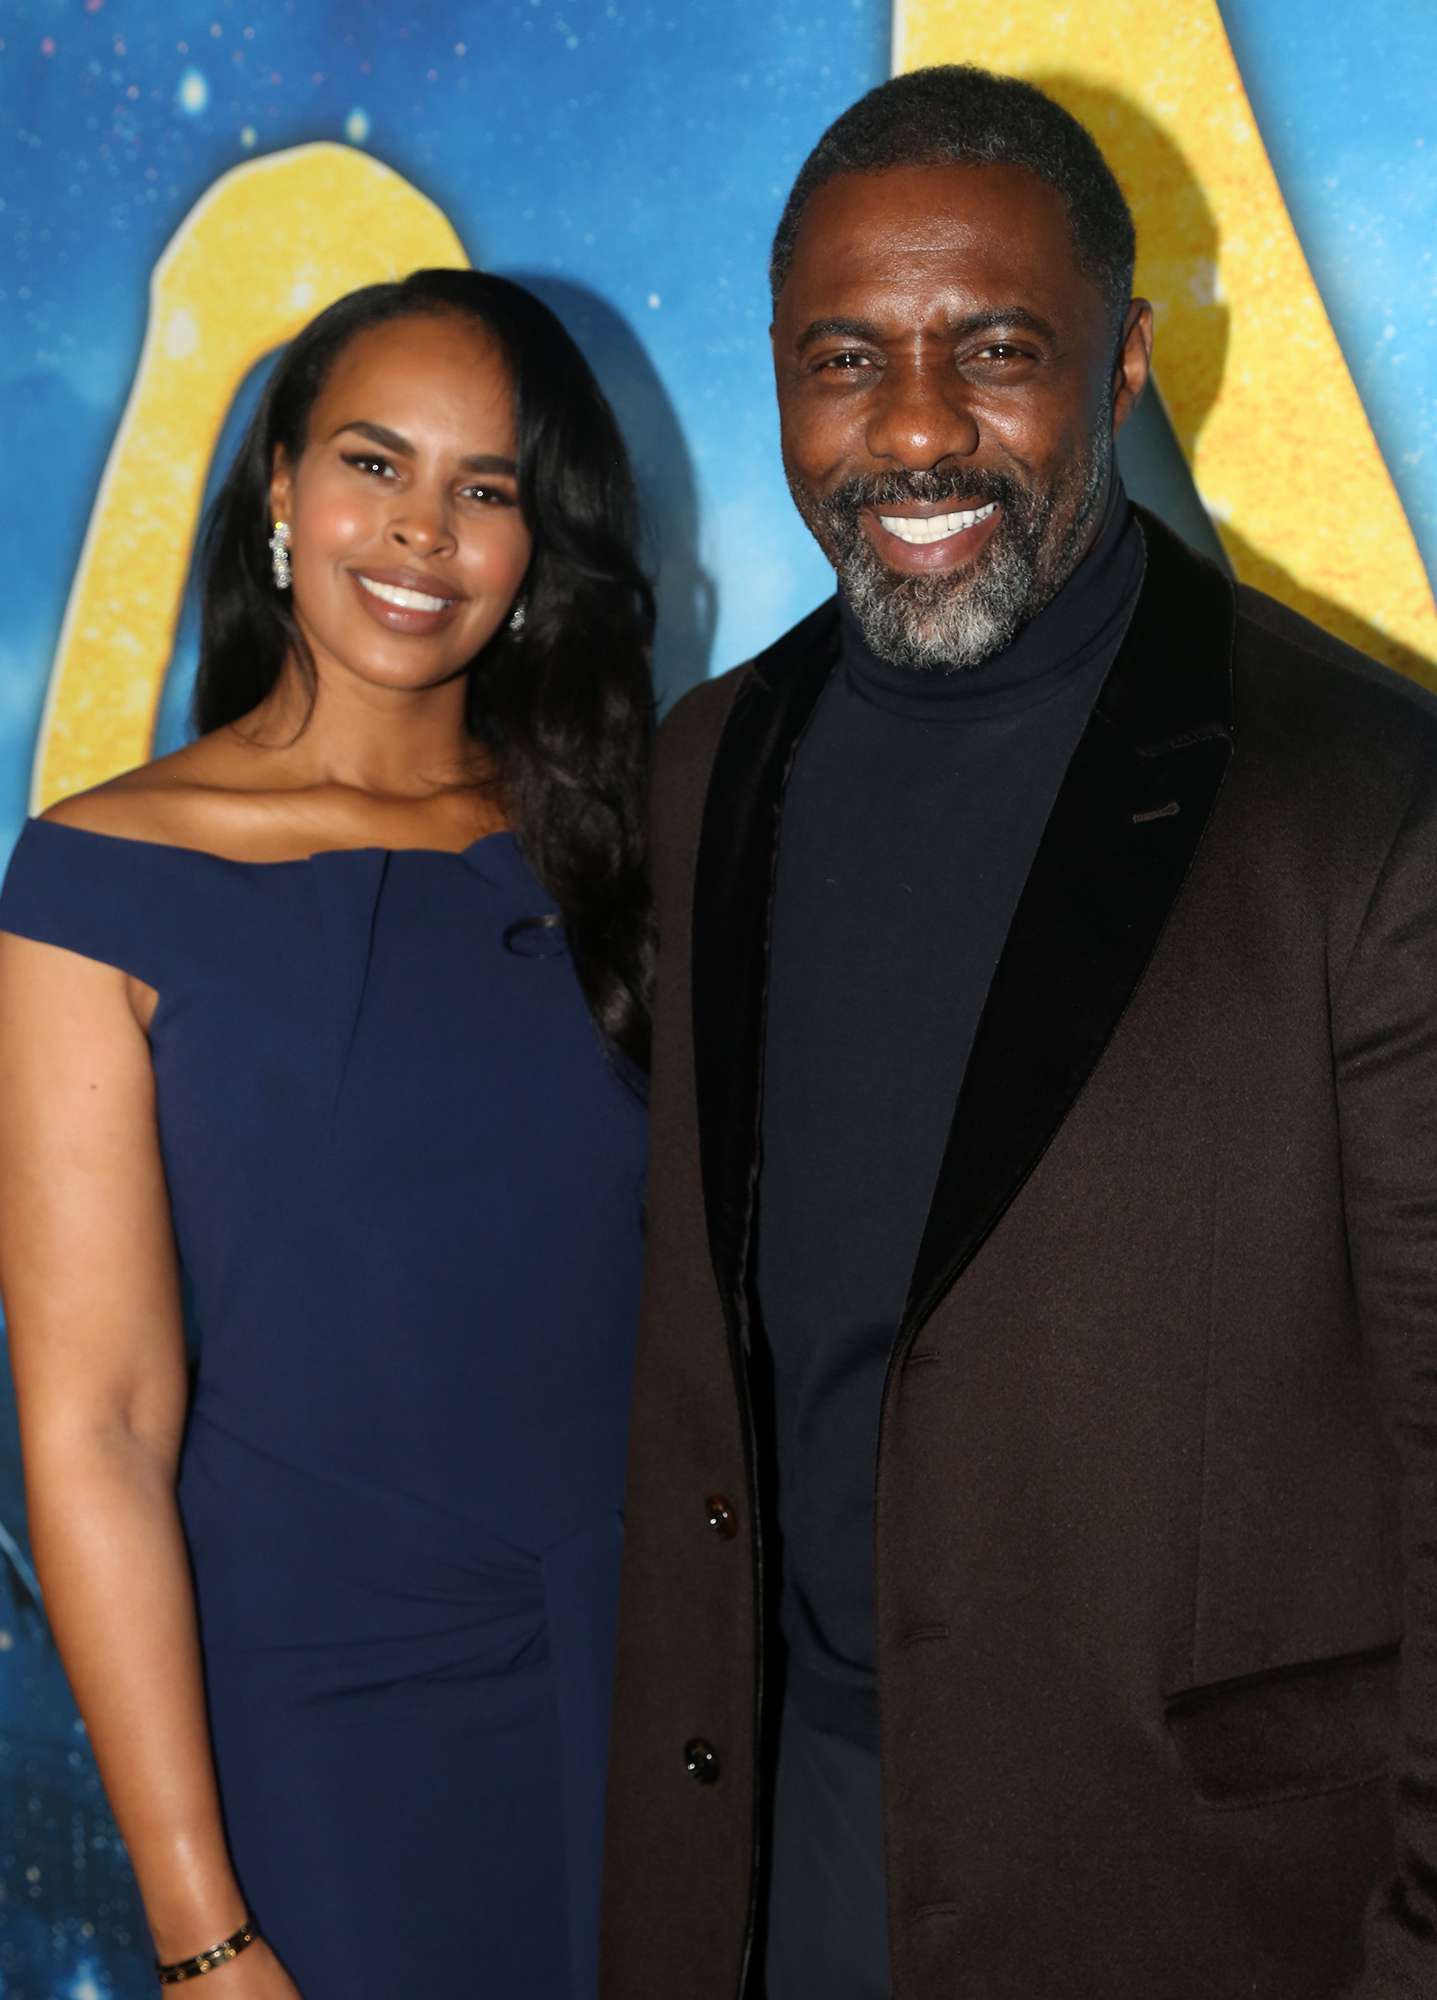 Sabrina Dhowre and Idris Elba pose at the world premiere of the new film "Cats" based on the Andrew Lloyd Webber musical at Alice Tully Hall, Lincoln Center on December 16, 2019 in New York City